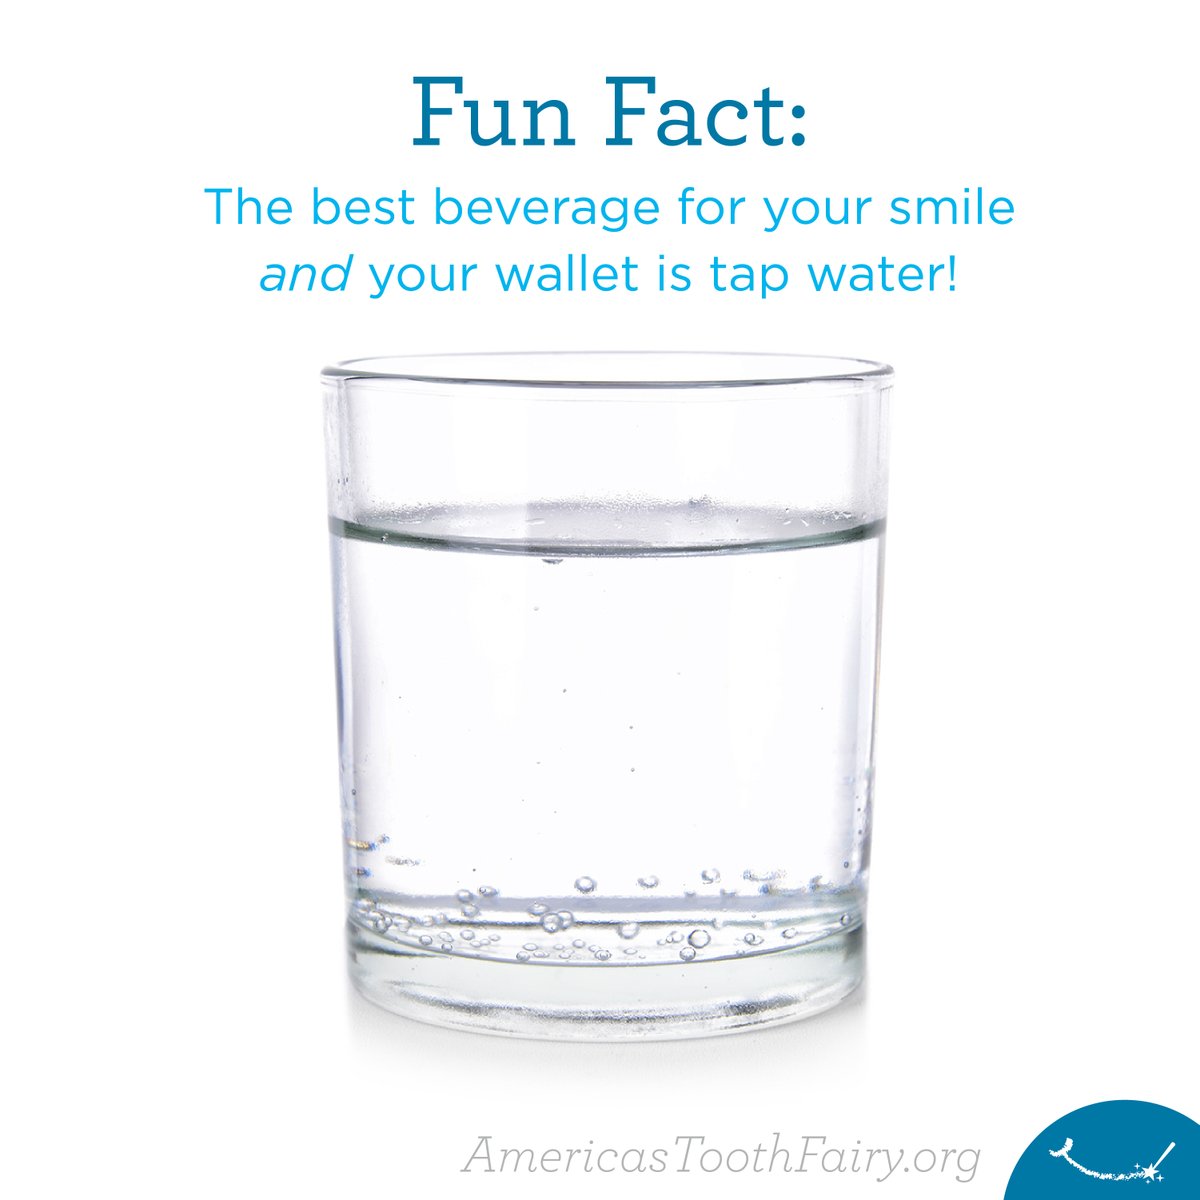 🥤The sugar & acids in sodas & sports drinks weaken the enamel that protects your teeth from decay.💧Tap water is cheap, calorie-free, and contains minerals that are good for your smile!
Learn more at the 🔗in our profile: 6 Dietary Tips for Healthy Teeth.
#NutritionMonth